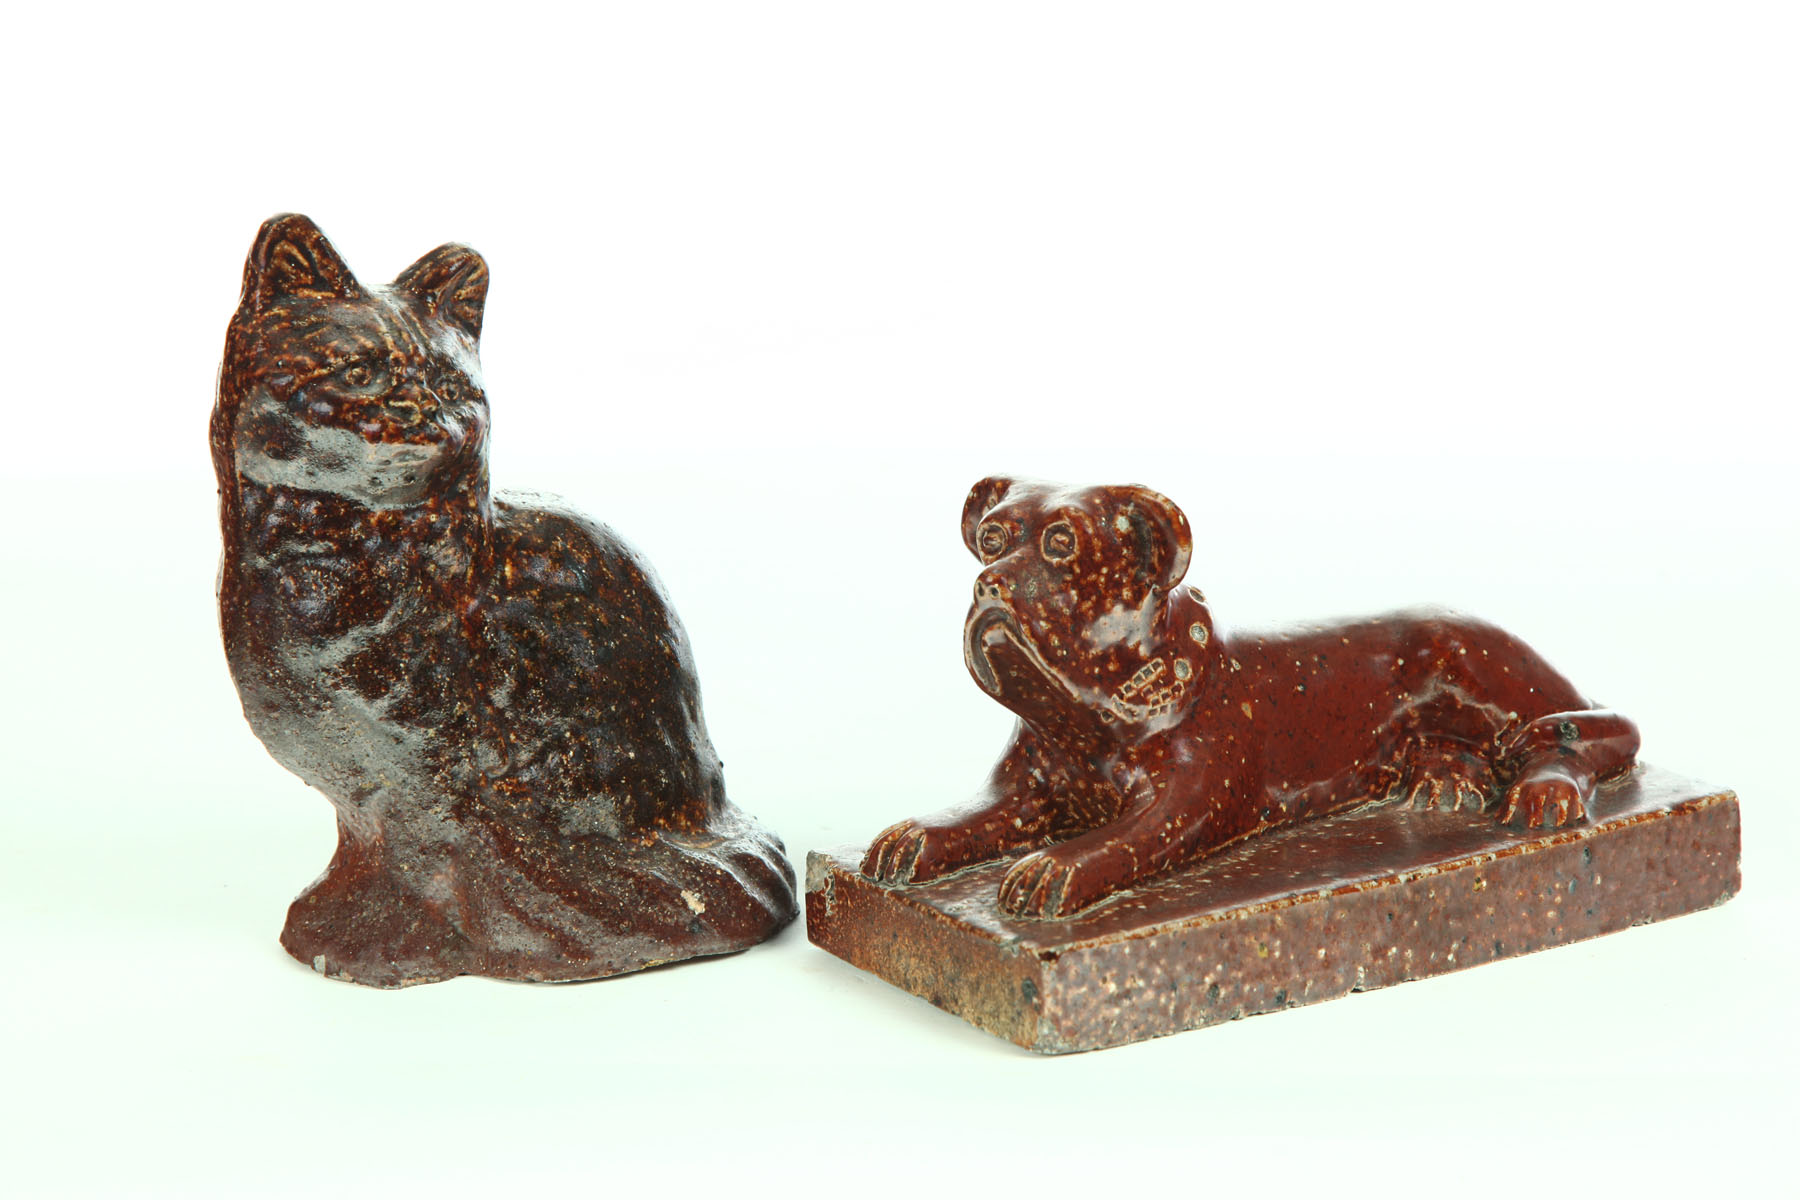 SEWERTILE DOG AND CAT.  Ohio  early